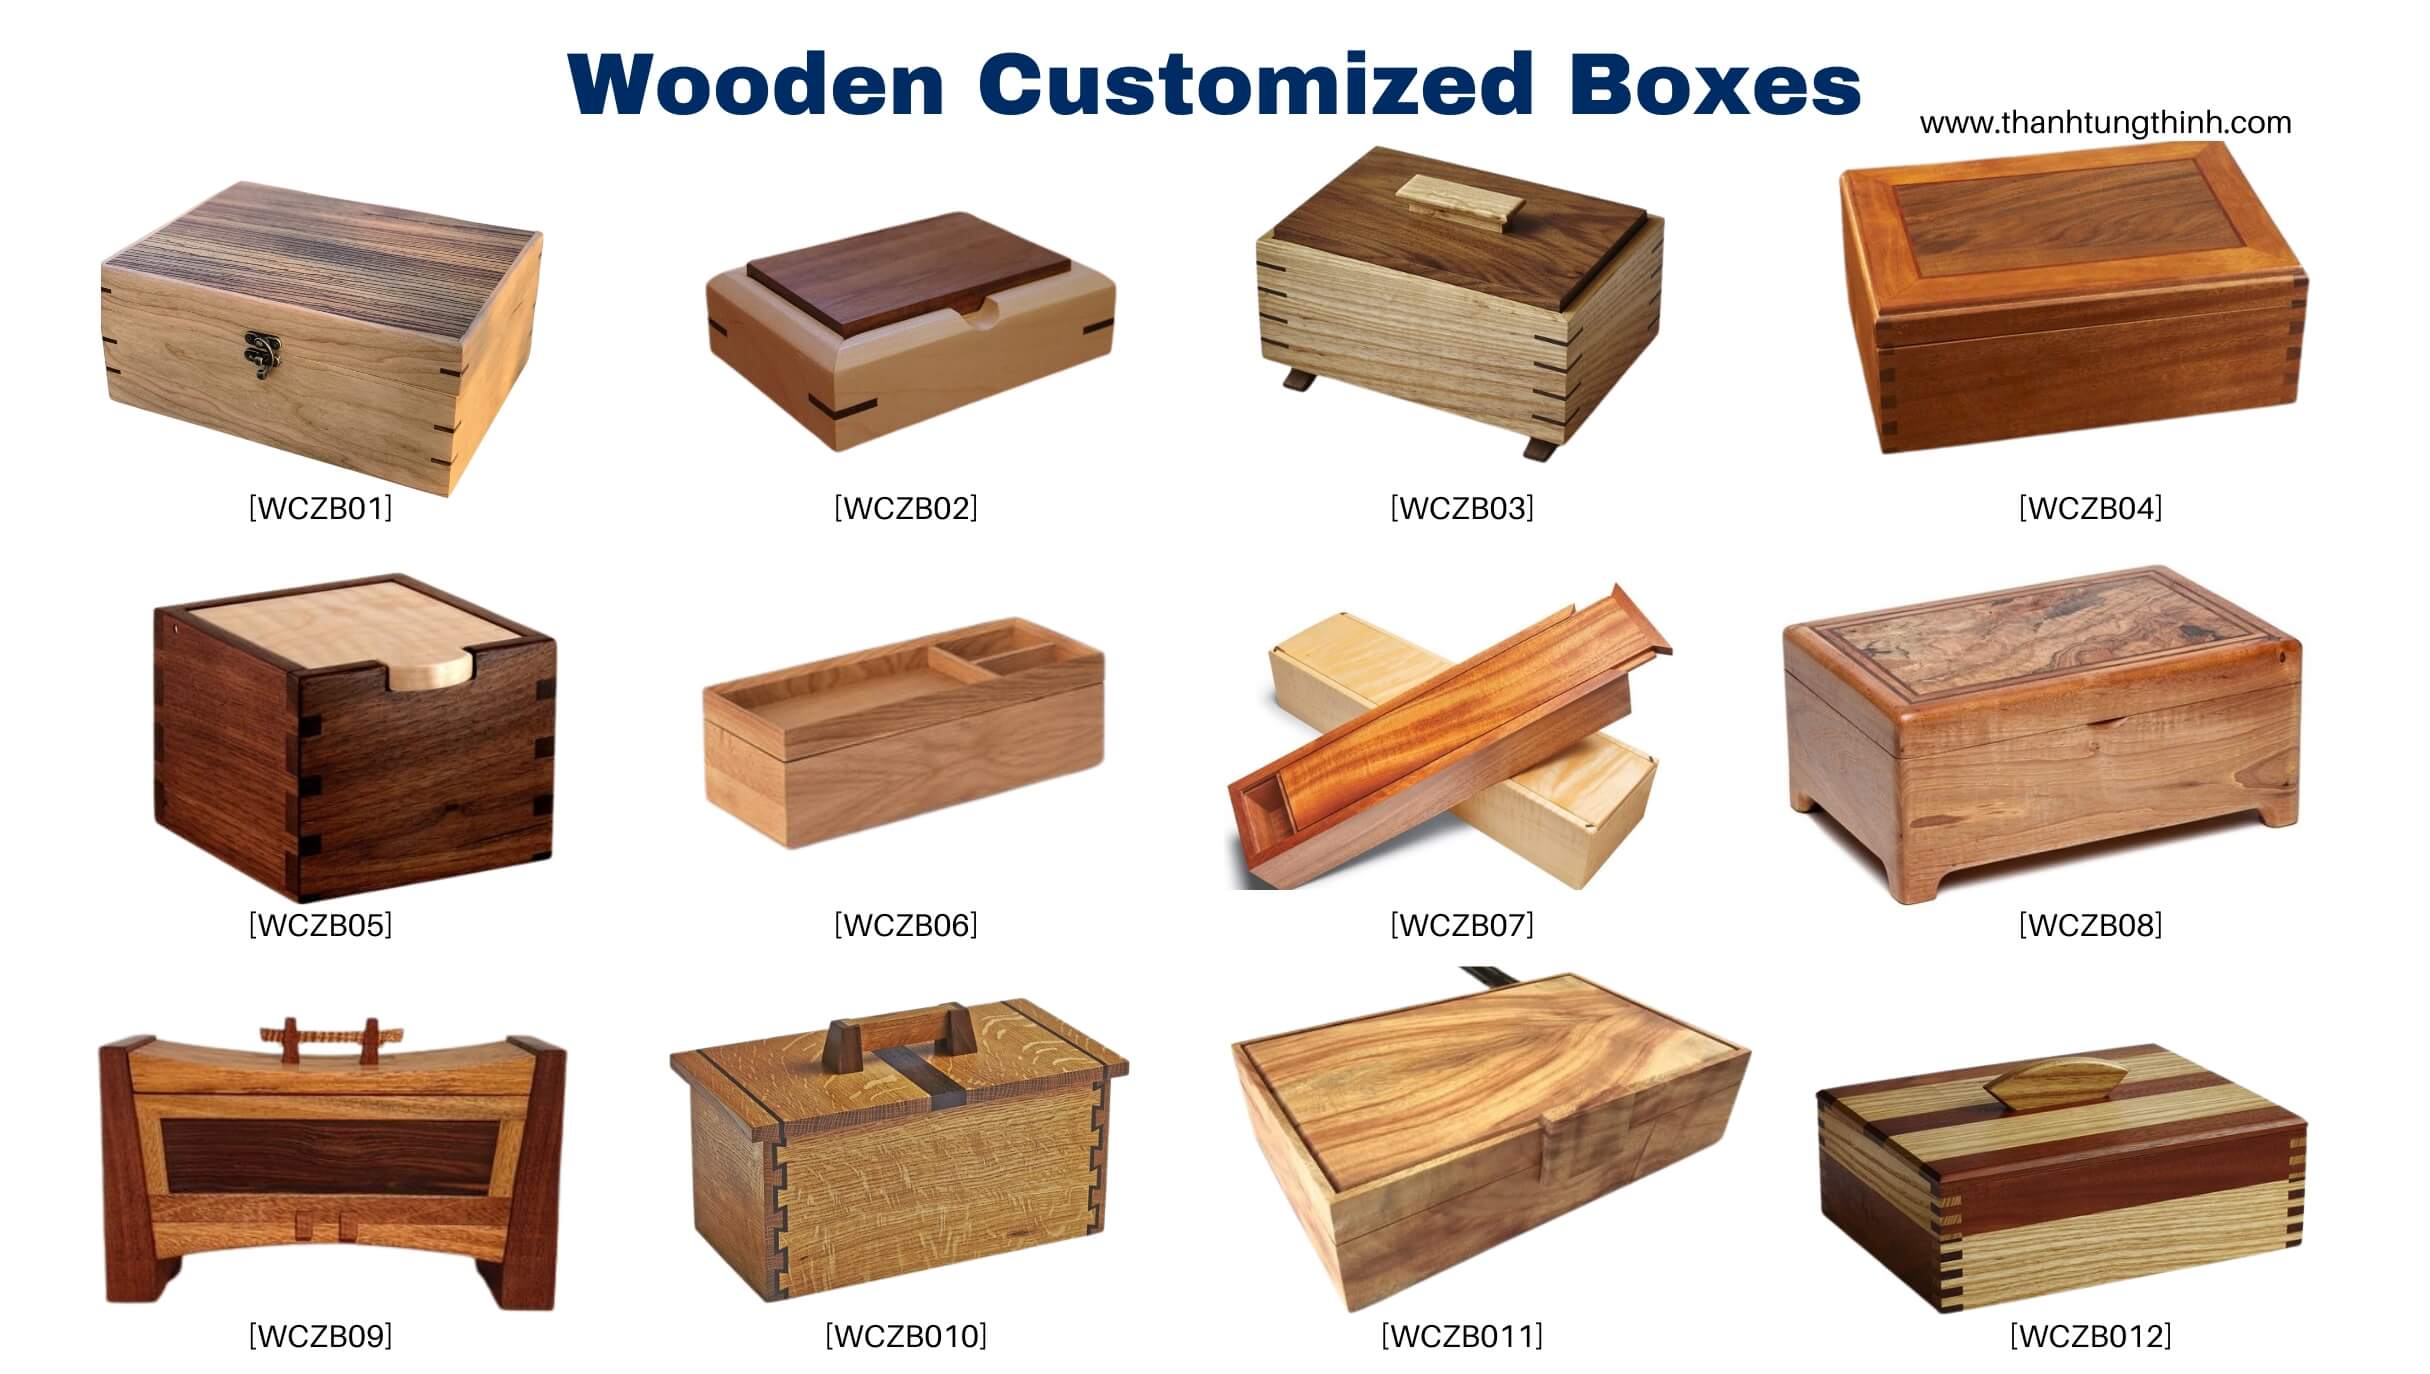 The Art of Customization: Innovative Wooden Box Features to Attract Retail Buyers - Manufacturer of Custom Wooden Boxes